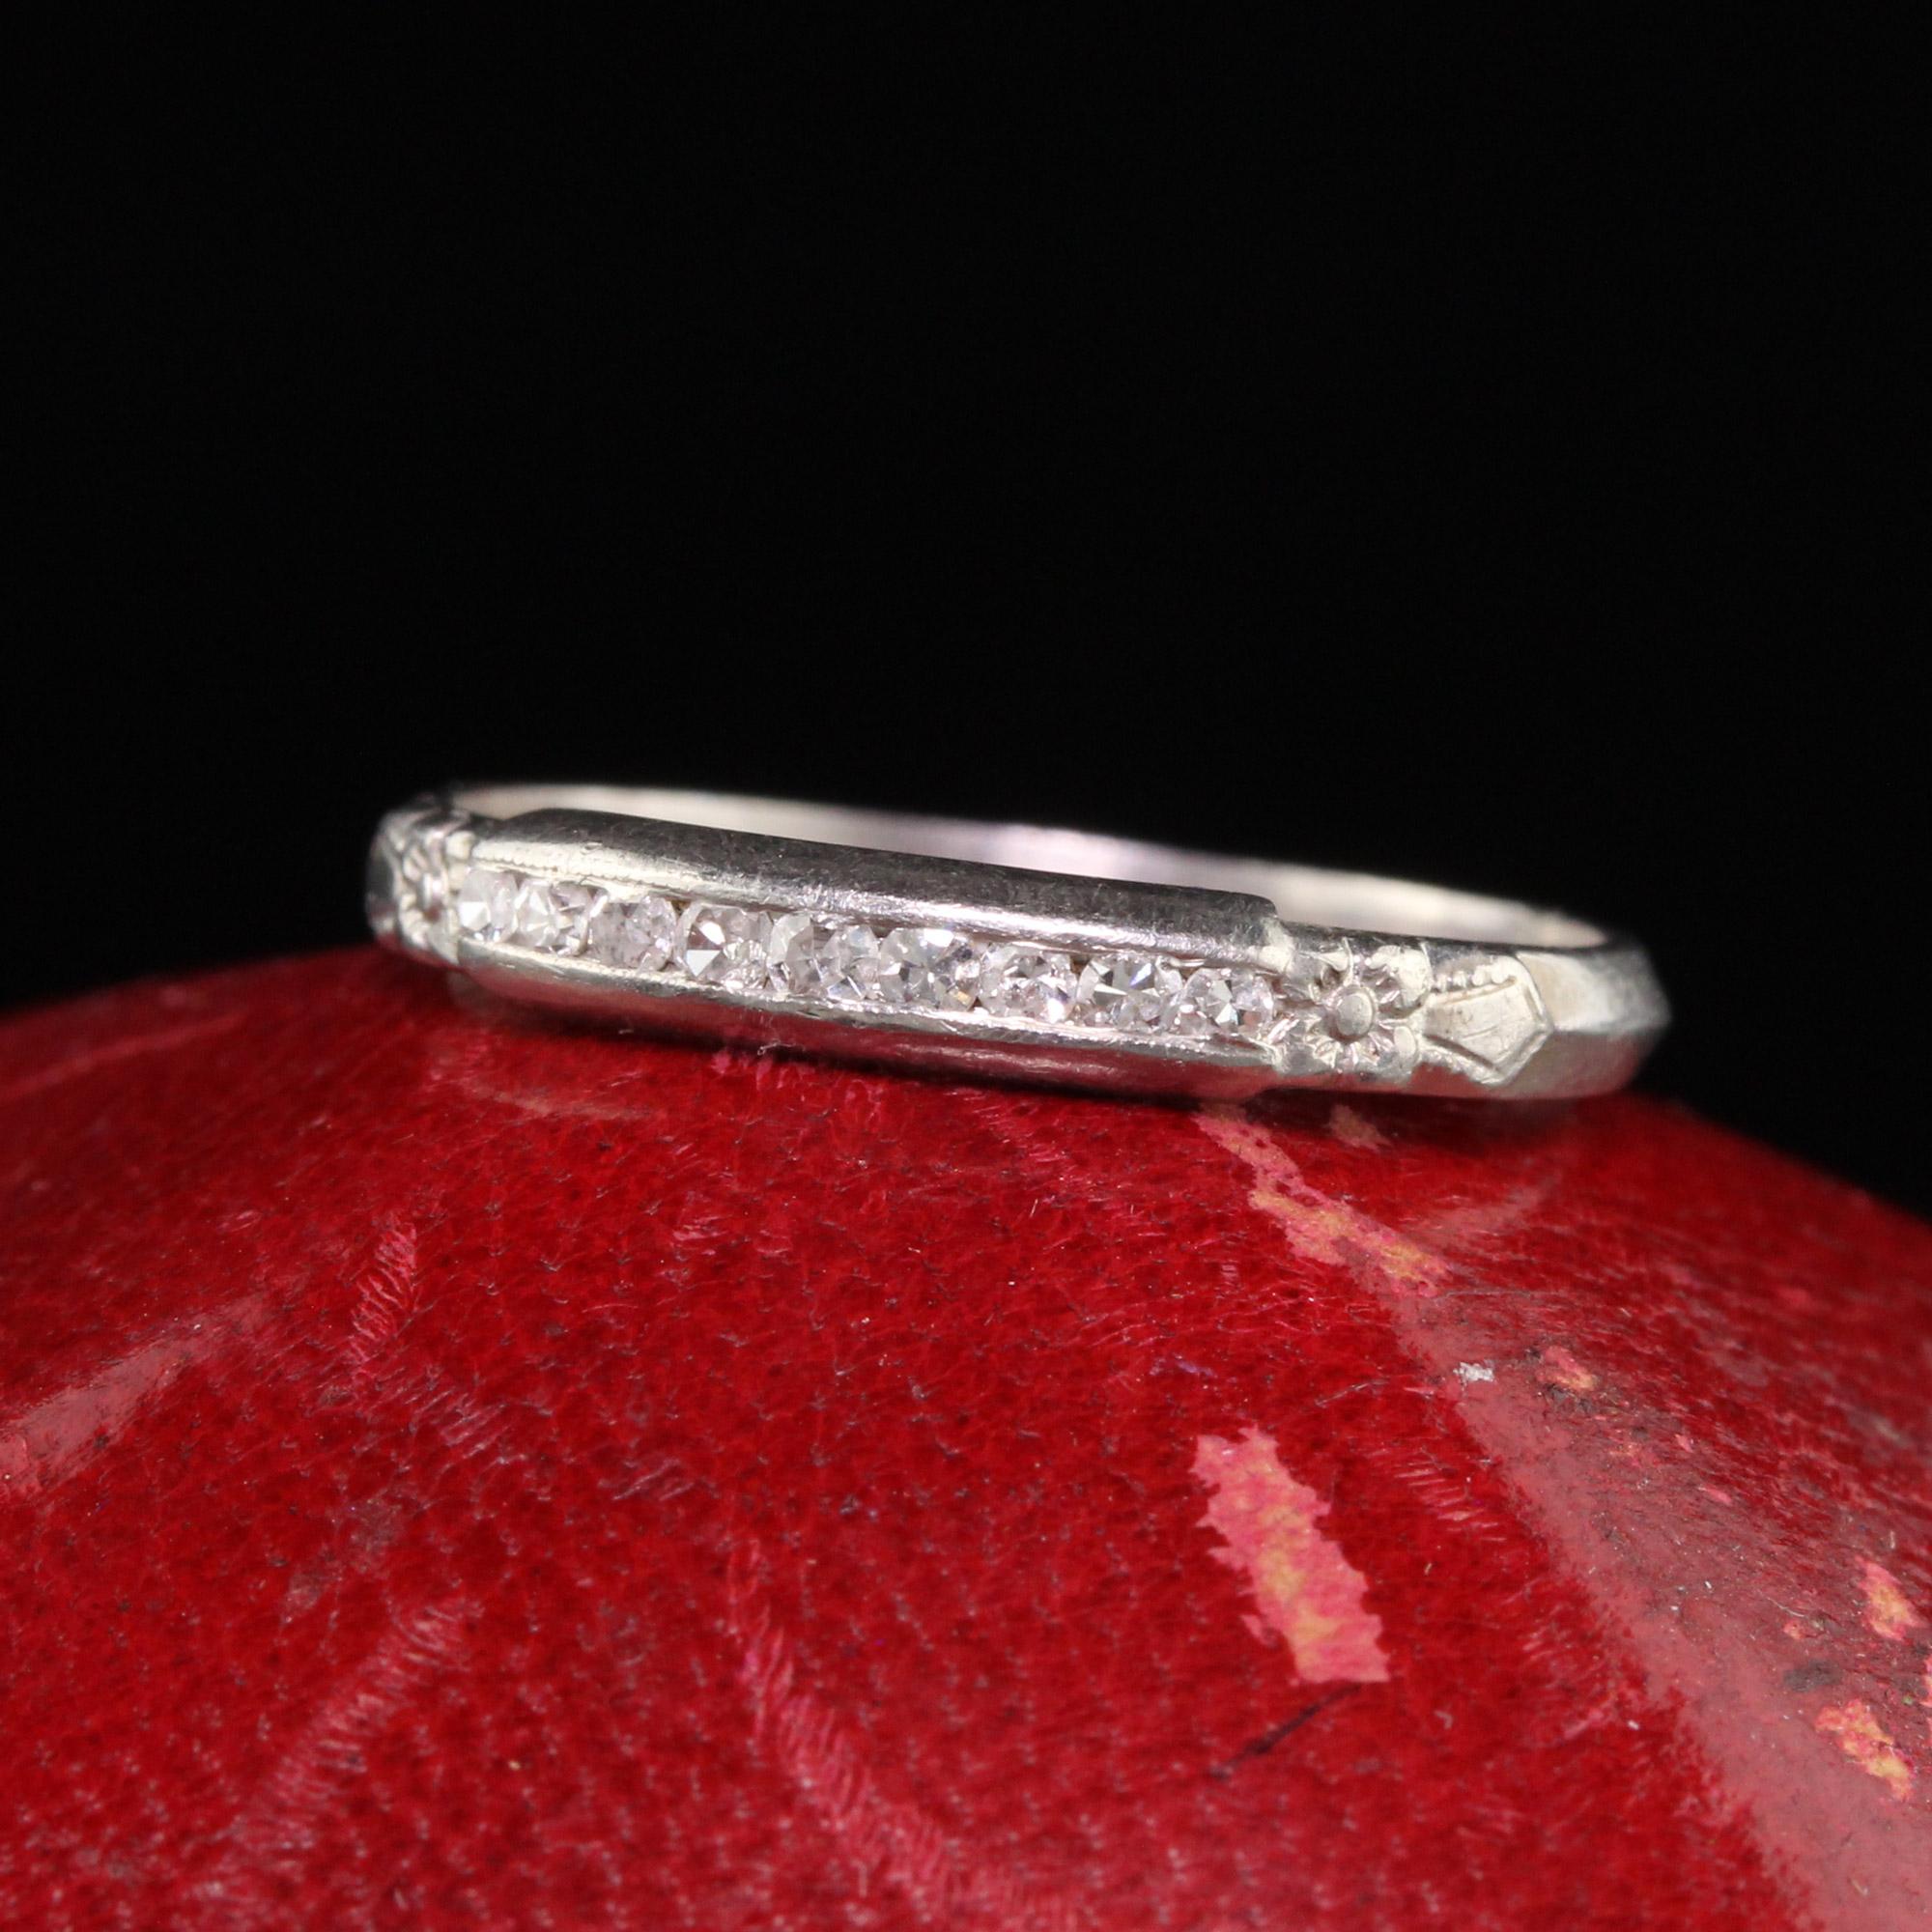 Beautiful Antique Art Deco Platinum Single Cut Diamond Wedding Band. This classic wedding band features single cut stones set in the center of a platinum mounting that has engraved flower blossoms on each side.

Item #R1109

Metal: Platinum

Weight: